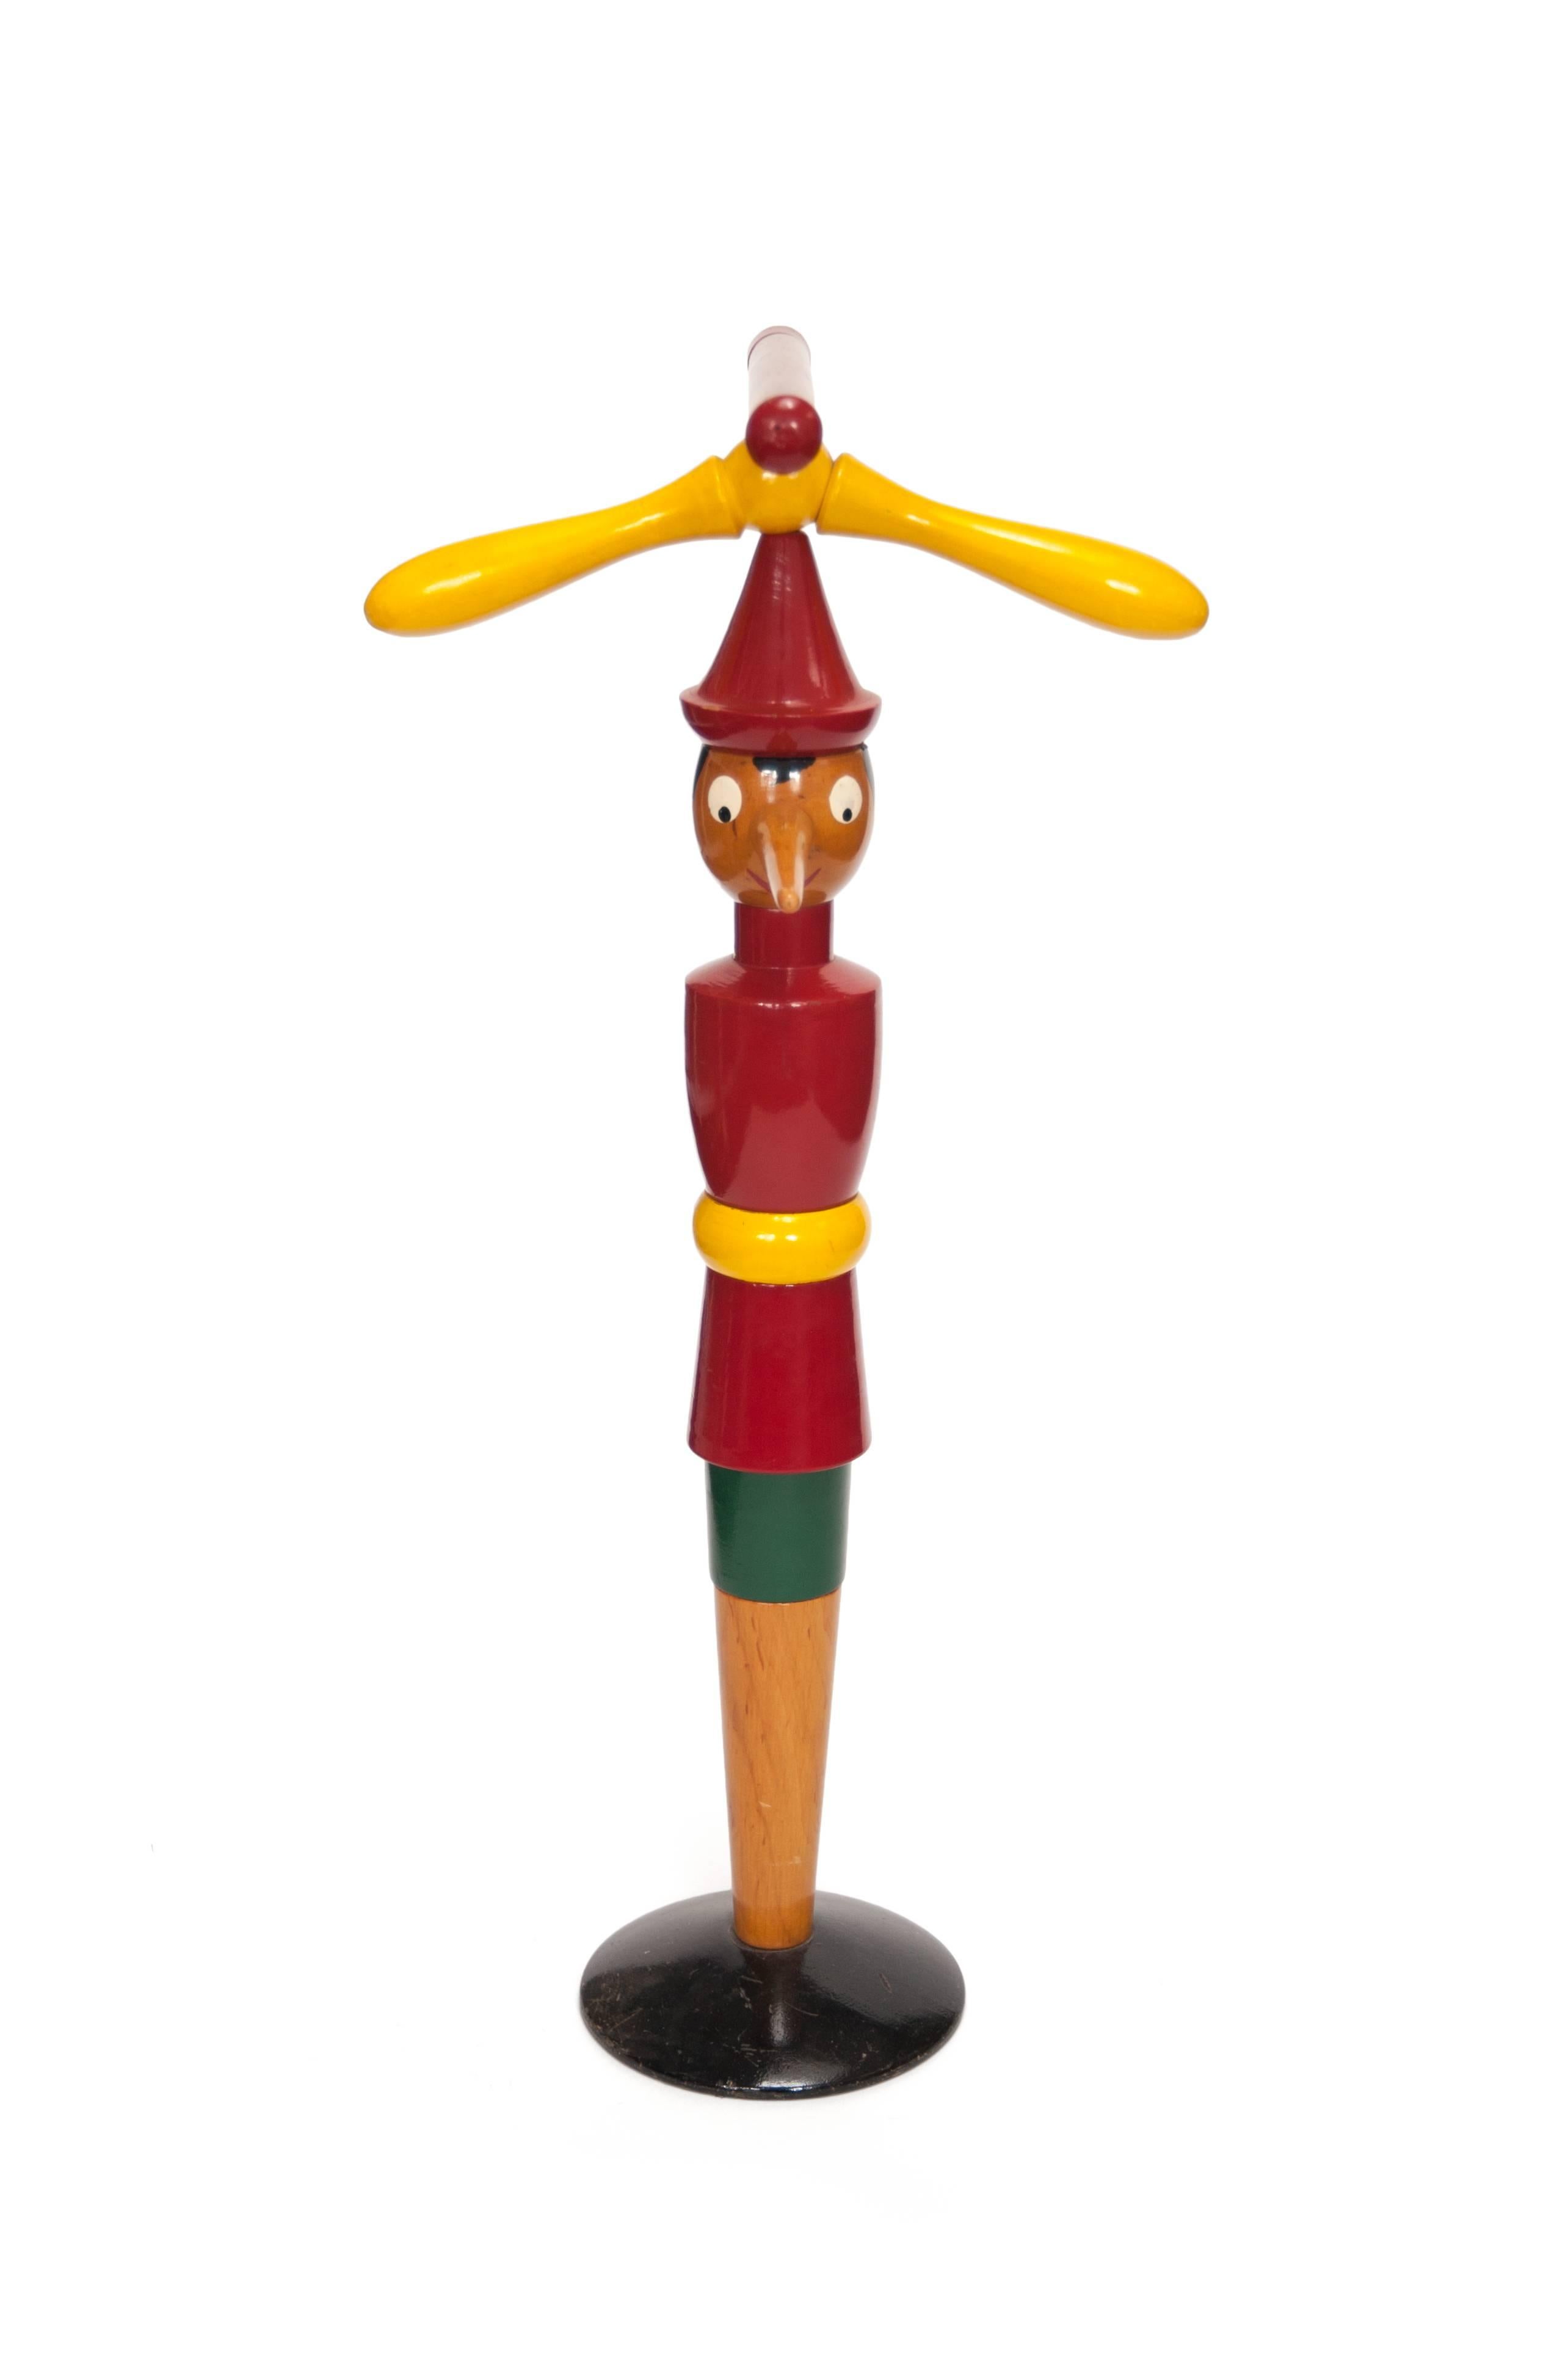 Pinocchio Valet, Vintage, Italy, 1940s

Pinocchio Valet
Vintage, Italy, 1940s
Painted wood
Measures: H 32.5 in, L 15.5 in, W 11.5 in.